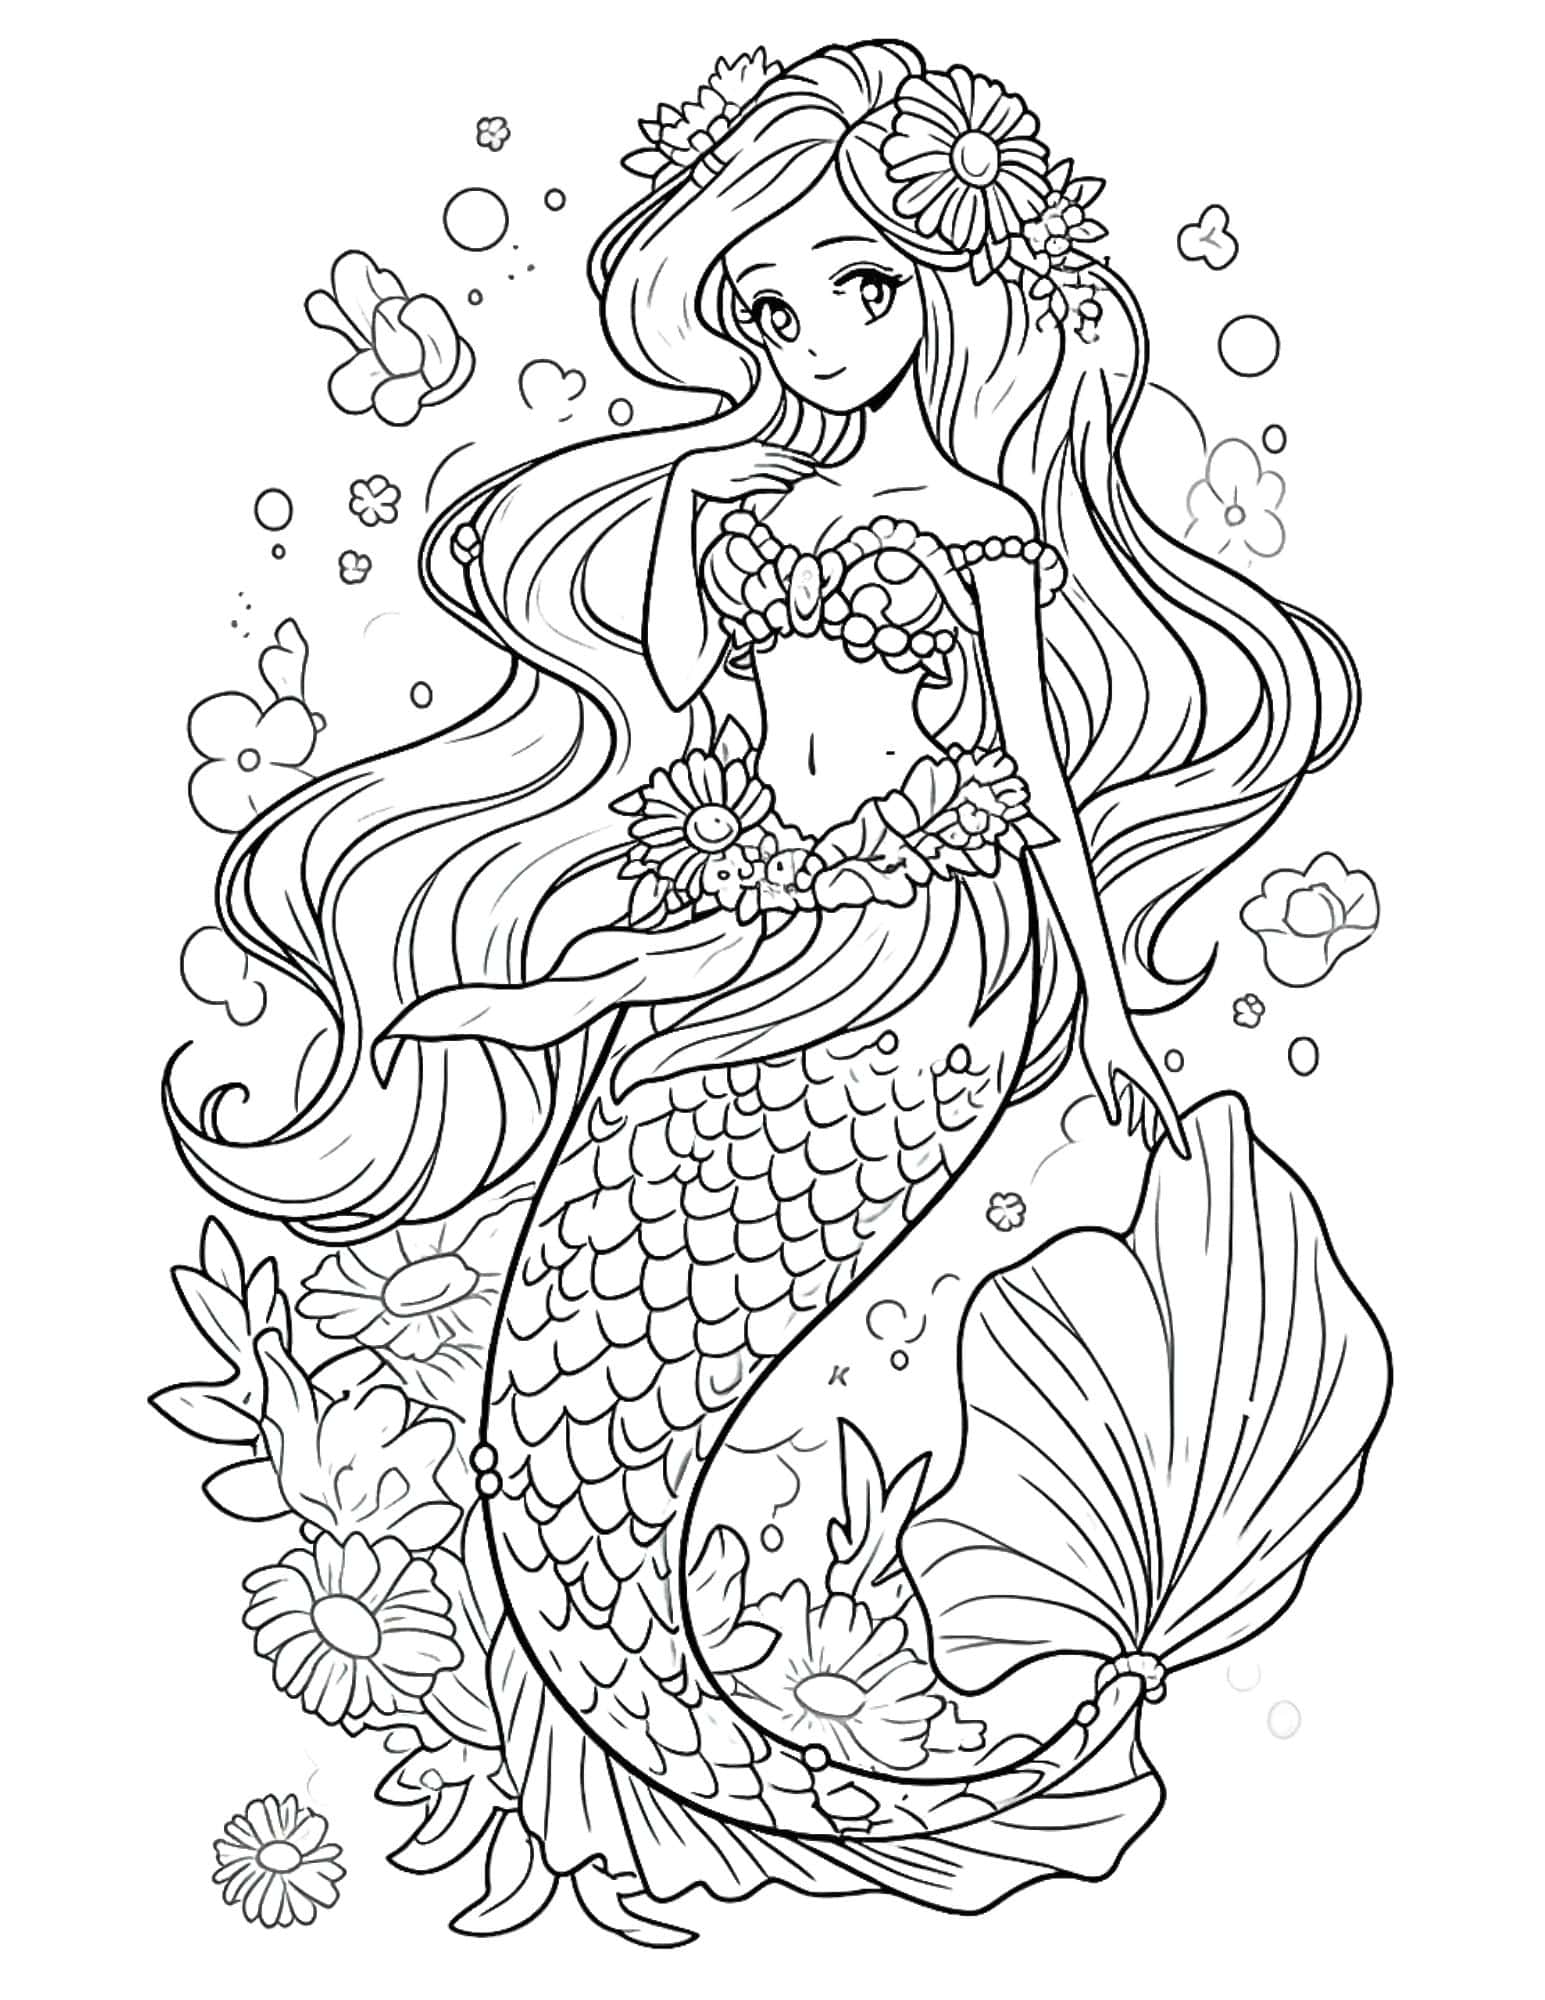 Mermaid coloring pages for kids and adults